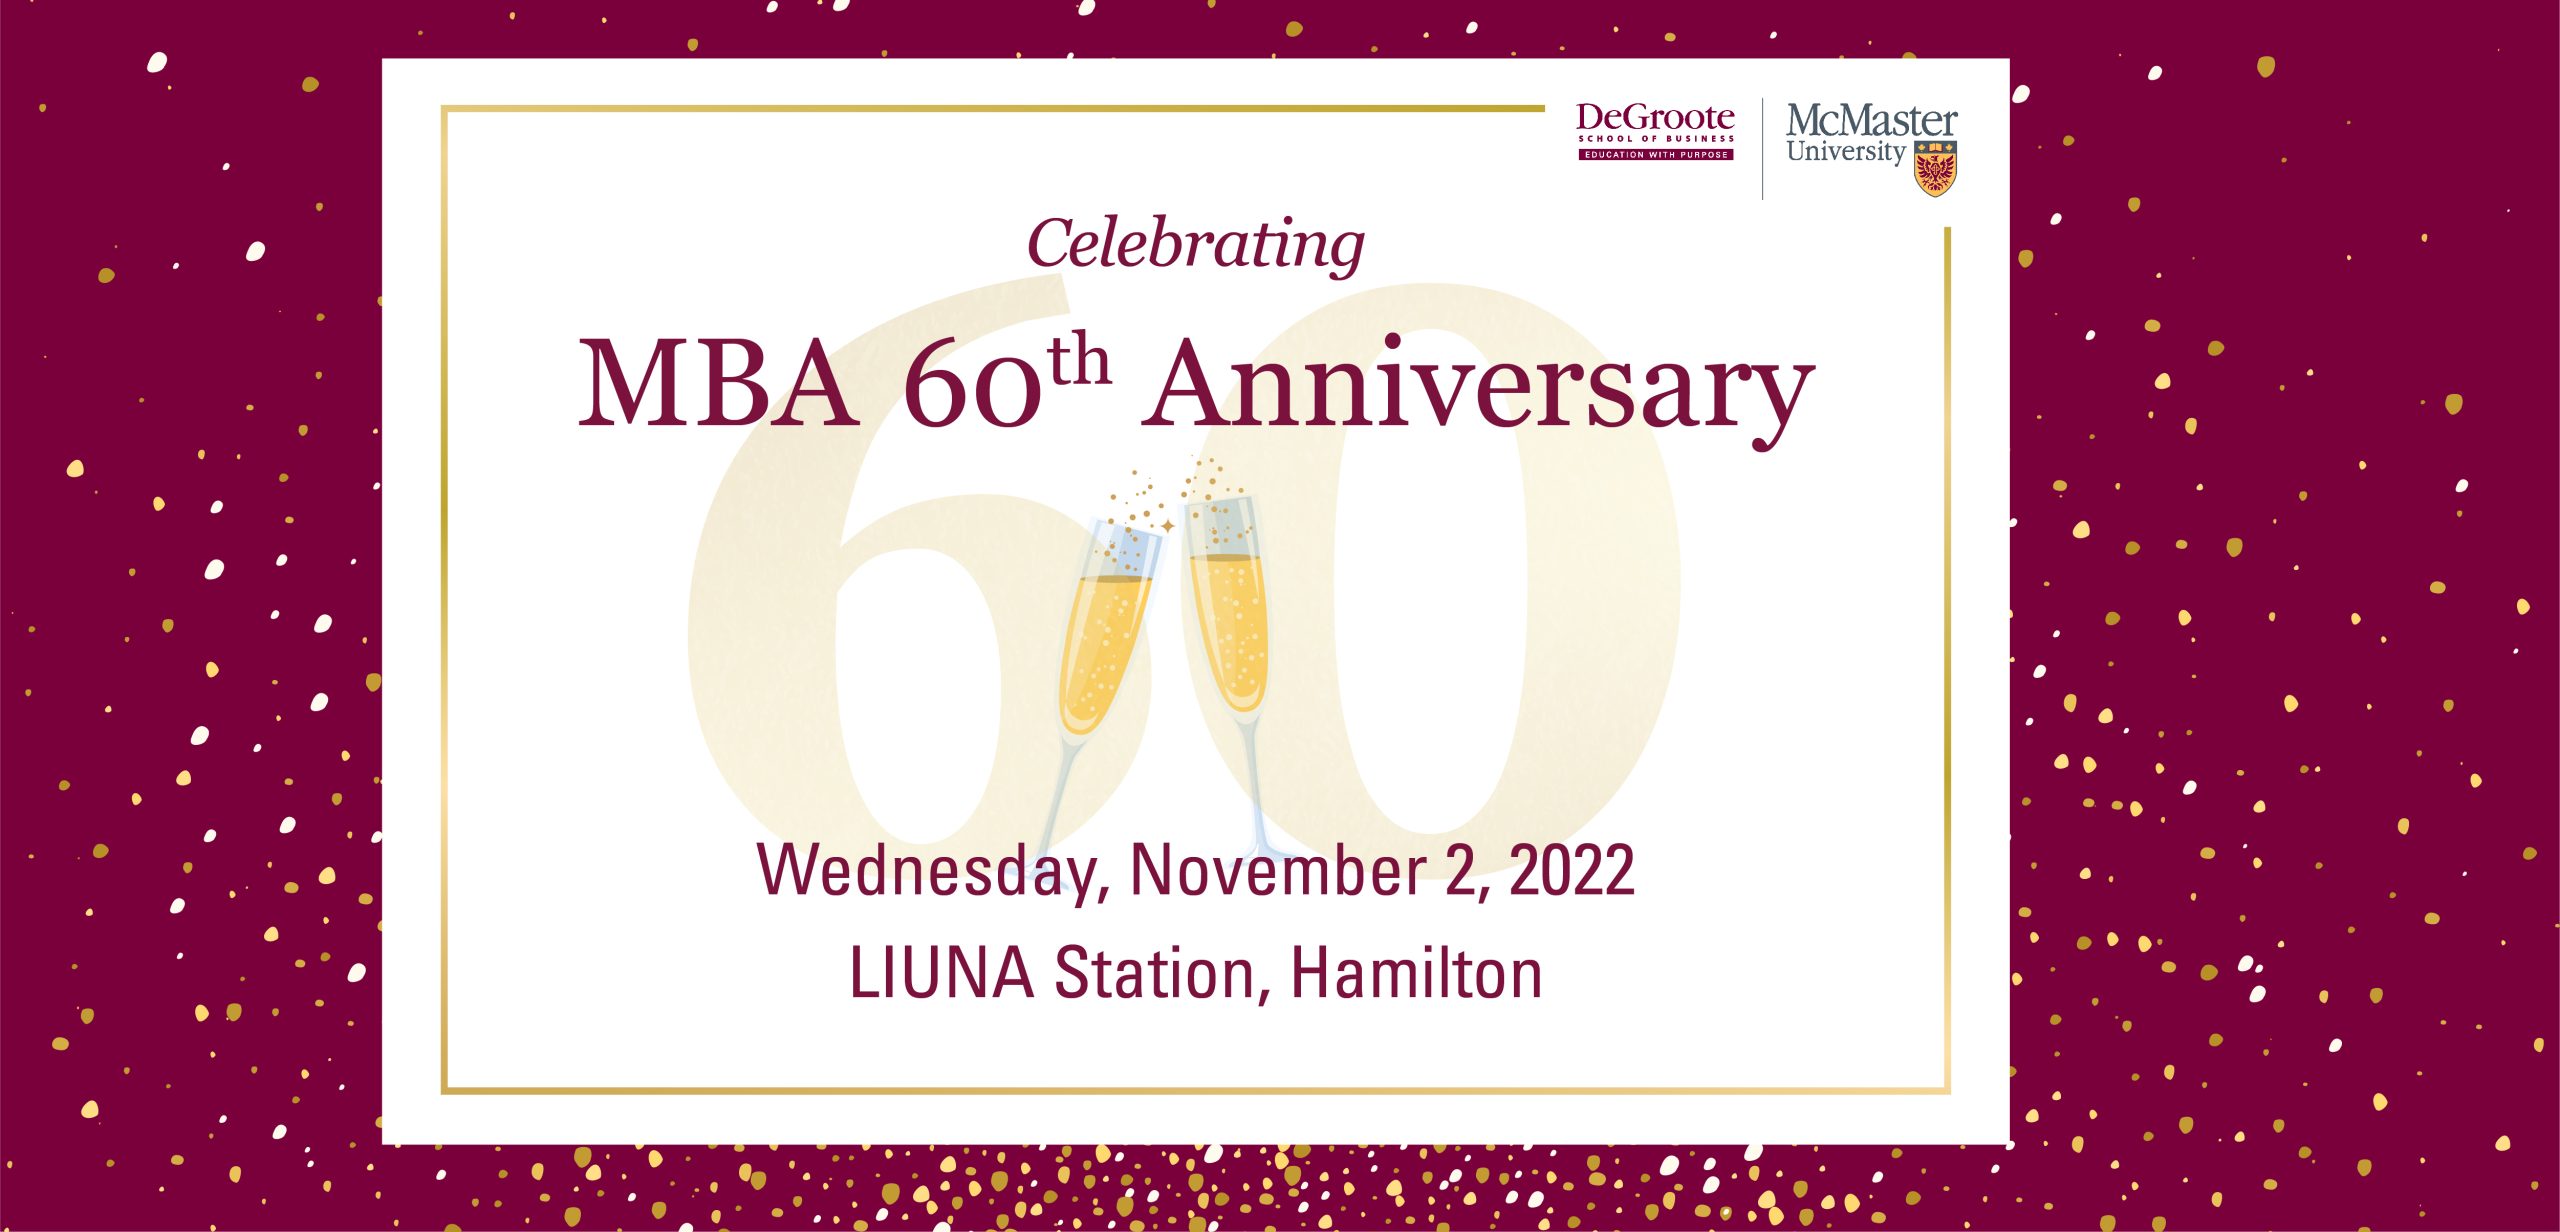 DeGroote MBA 60th Event